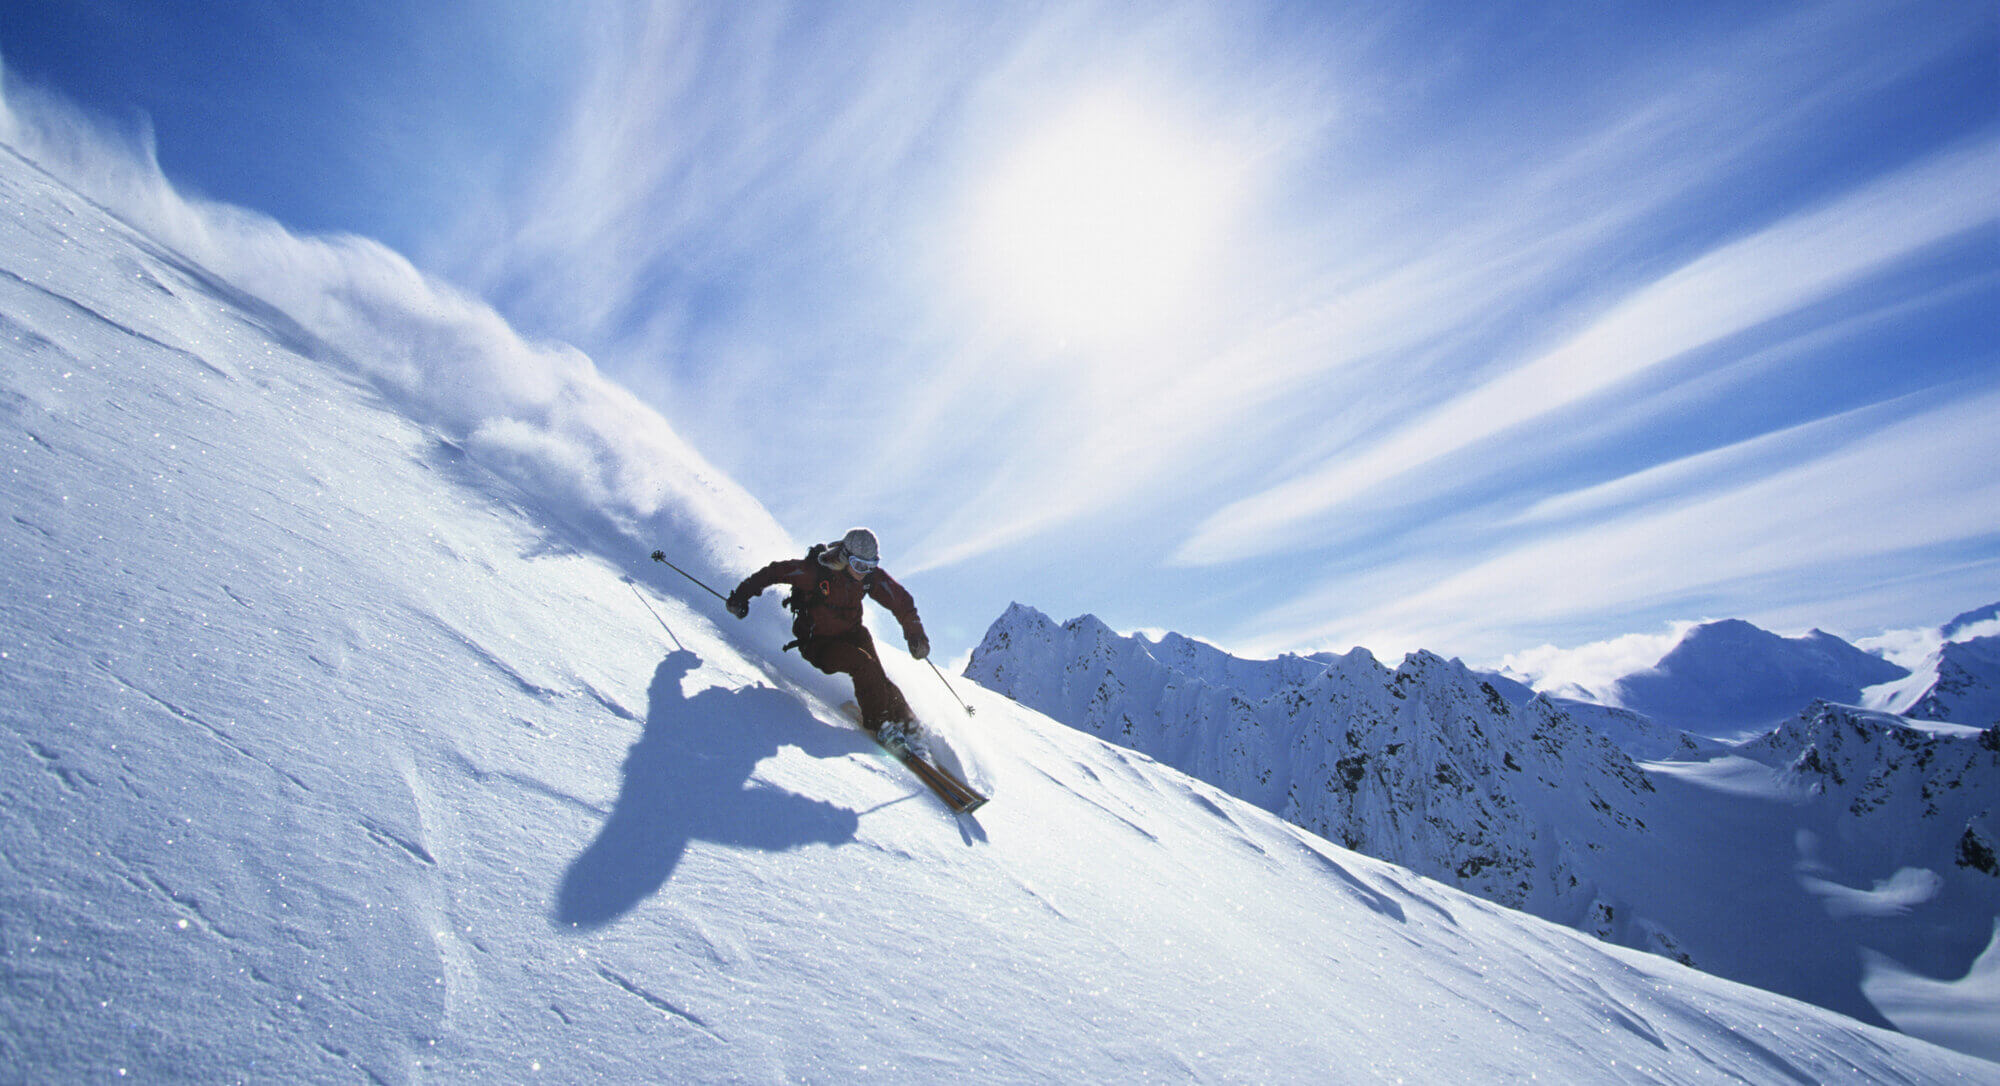 Best spring skiing destinations in the USA